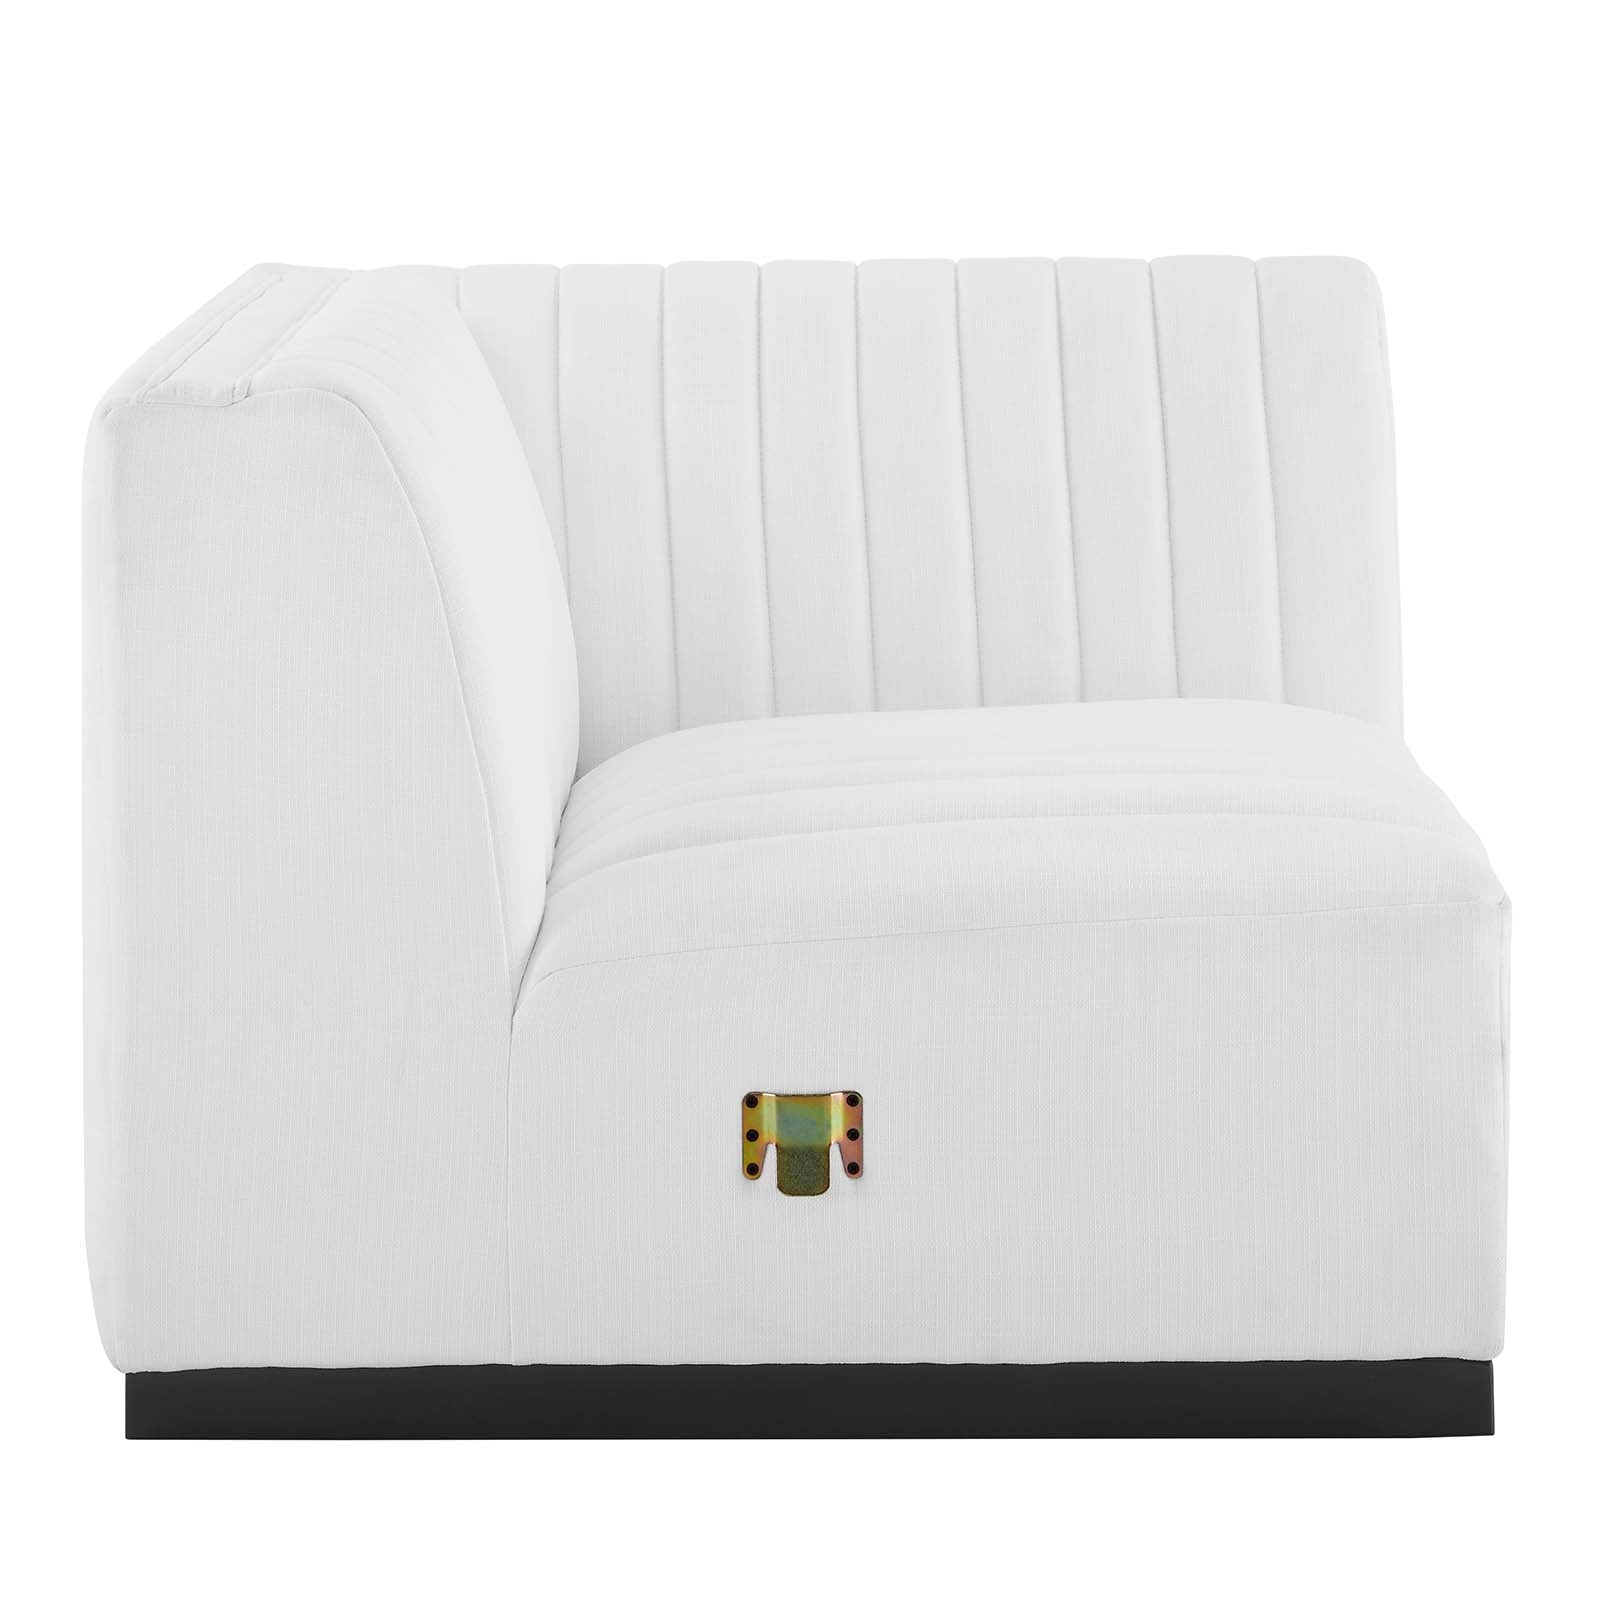 Modway Accent Chairs - Conjure Channel Tufted Upholstered Fabric Right Corner Chair Black White